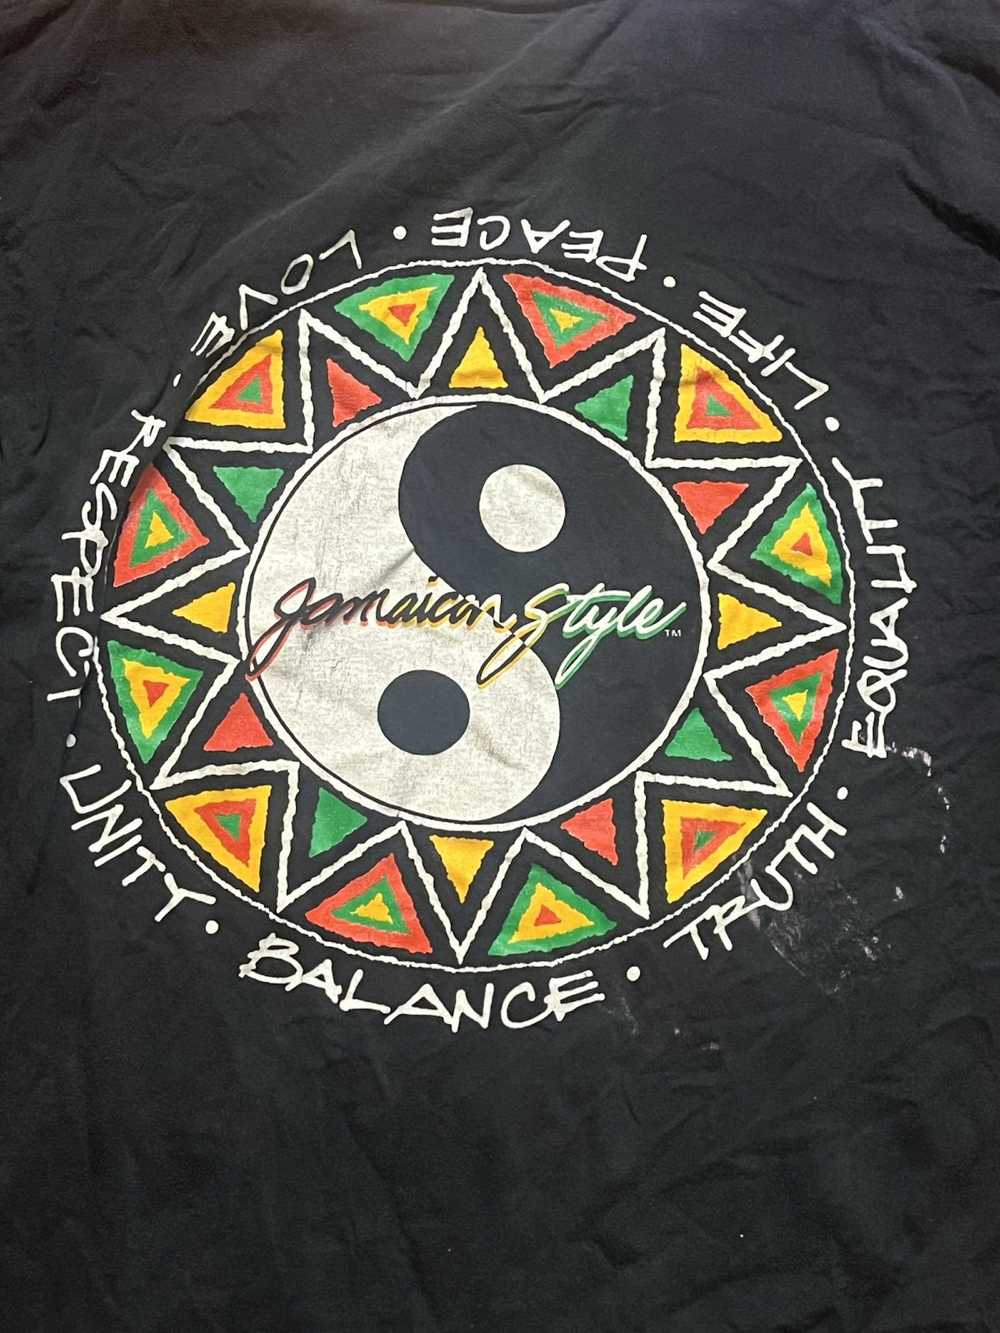 Vintage 1990s Jamaican style t shirt. - image 4